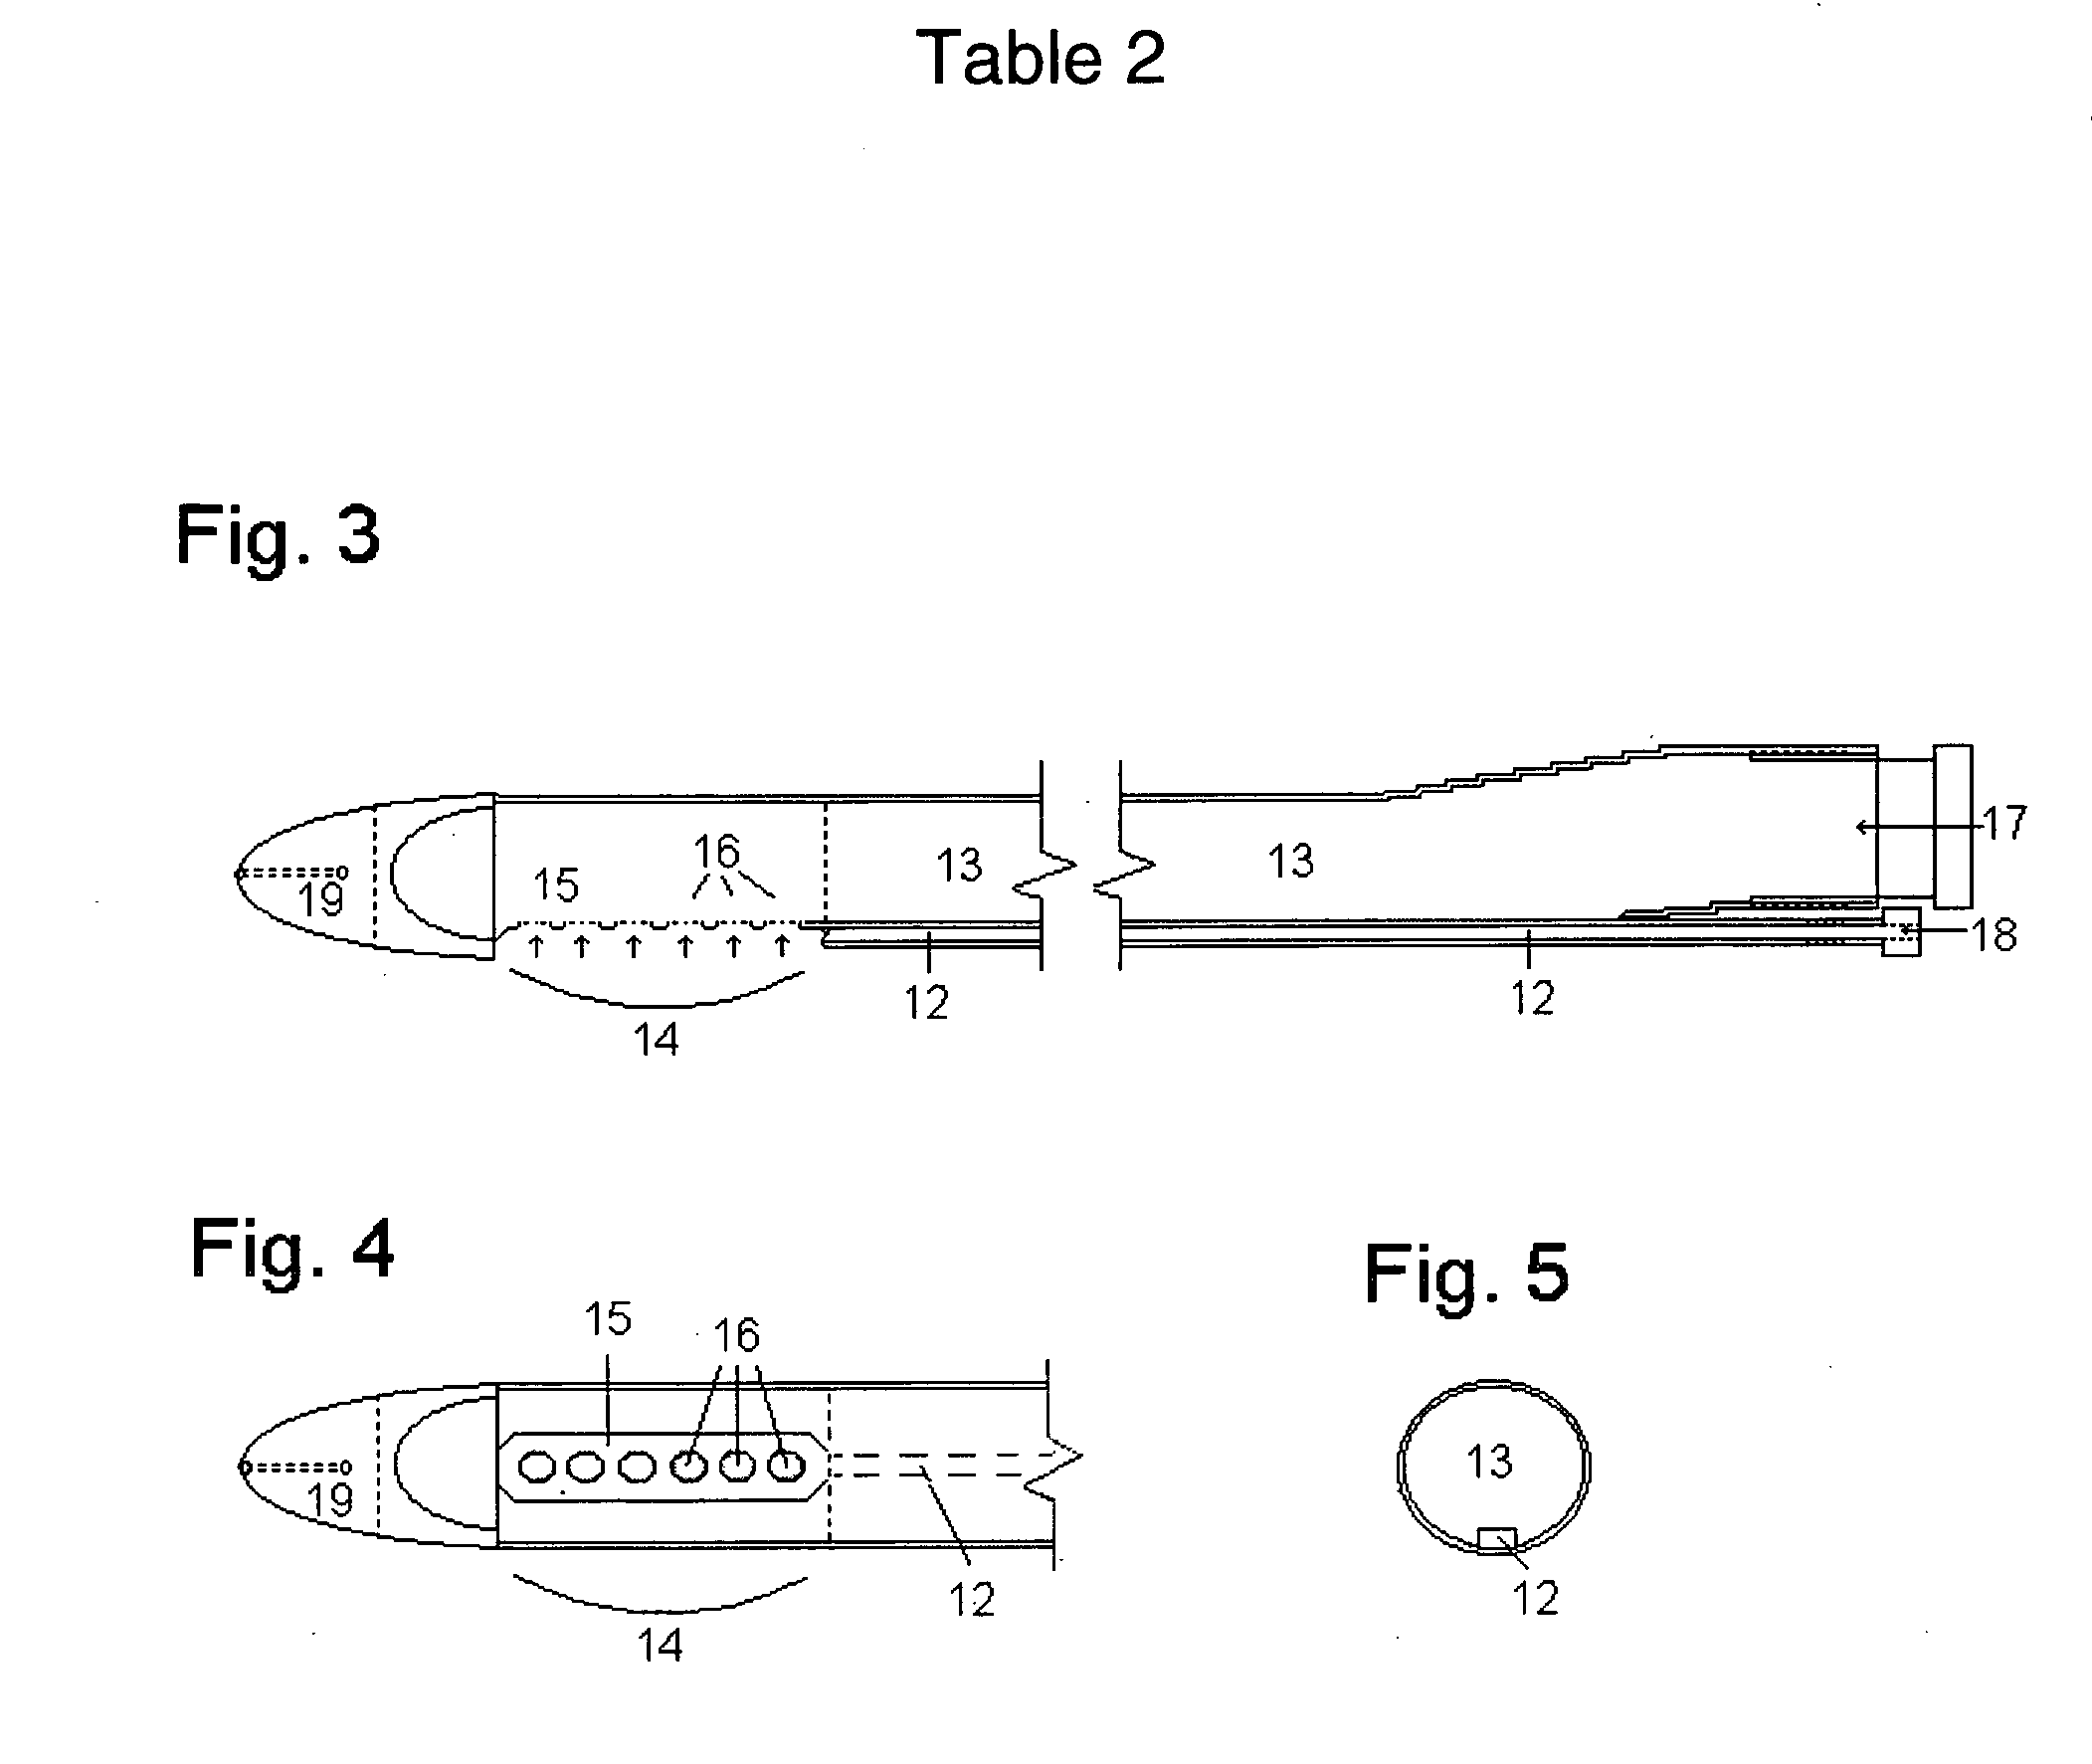 Magnetic device and method to prevent gastroesophageal reflux, fecal incontinence and urinary incontinence